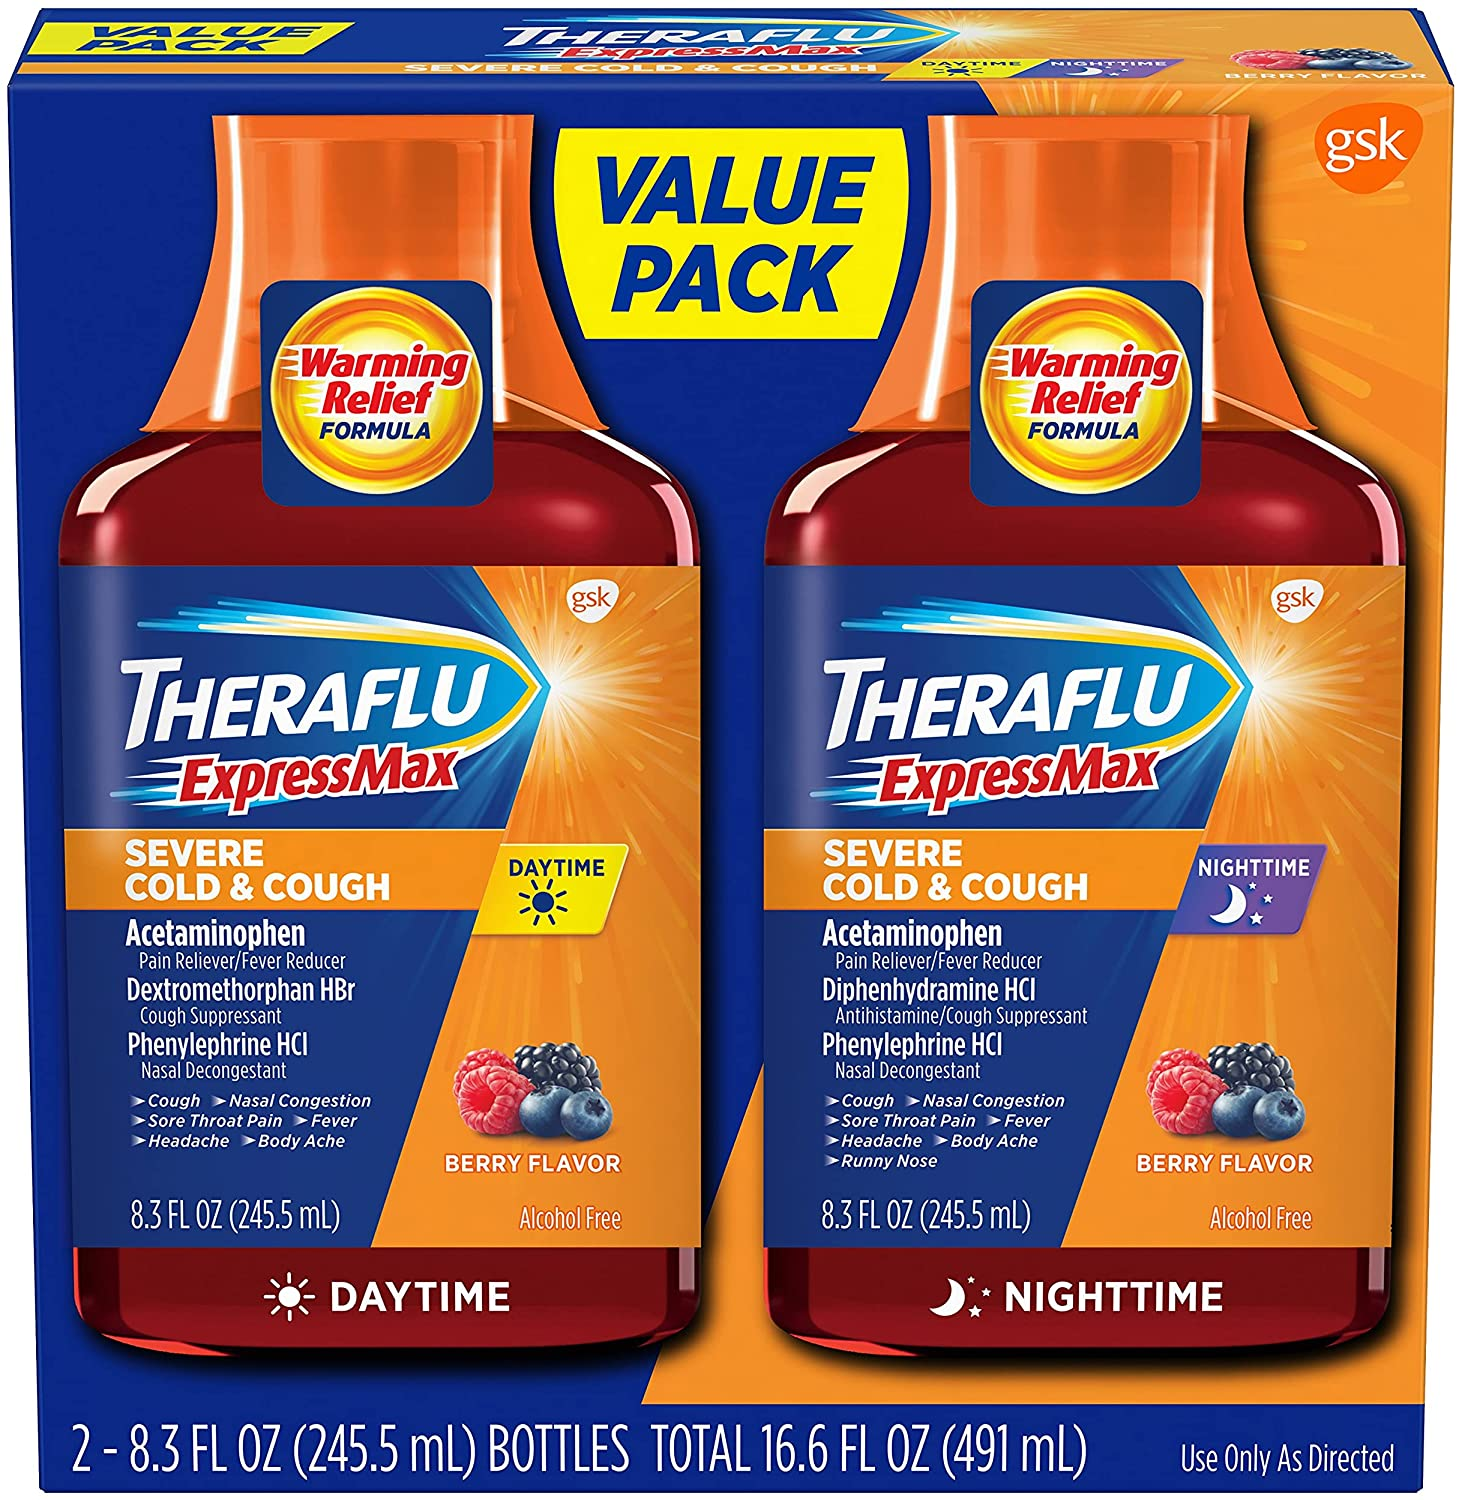 Amazon.com: Theraflu ExpressMax Daytime/Nighttime Severe Cold & Cough Relief Syrups, Berry Flavor, 8.3 oz (Combo Pack) : Health & Household $5.55